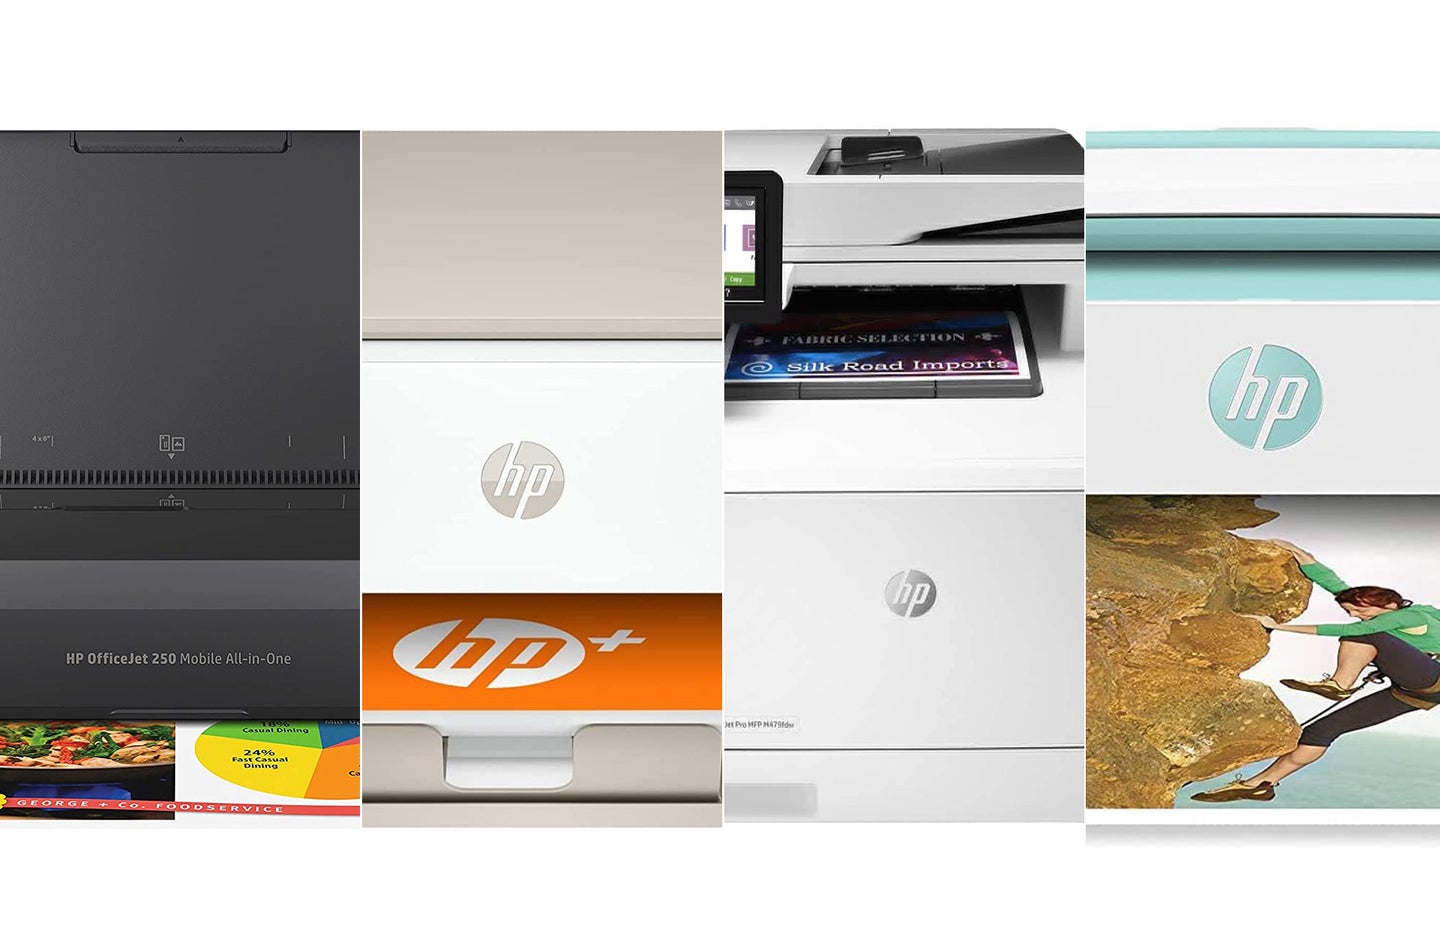 The best HP printers composited